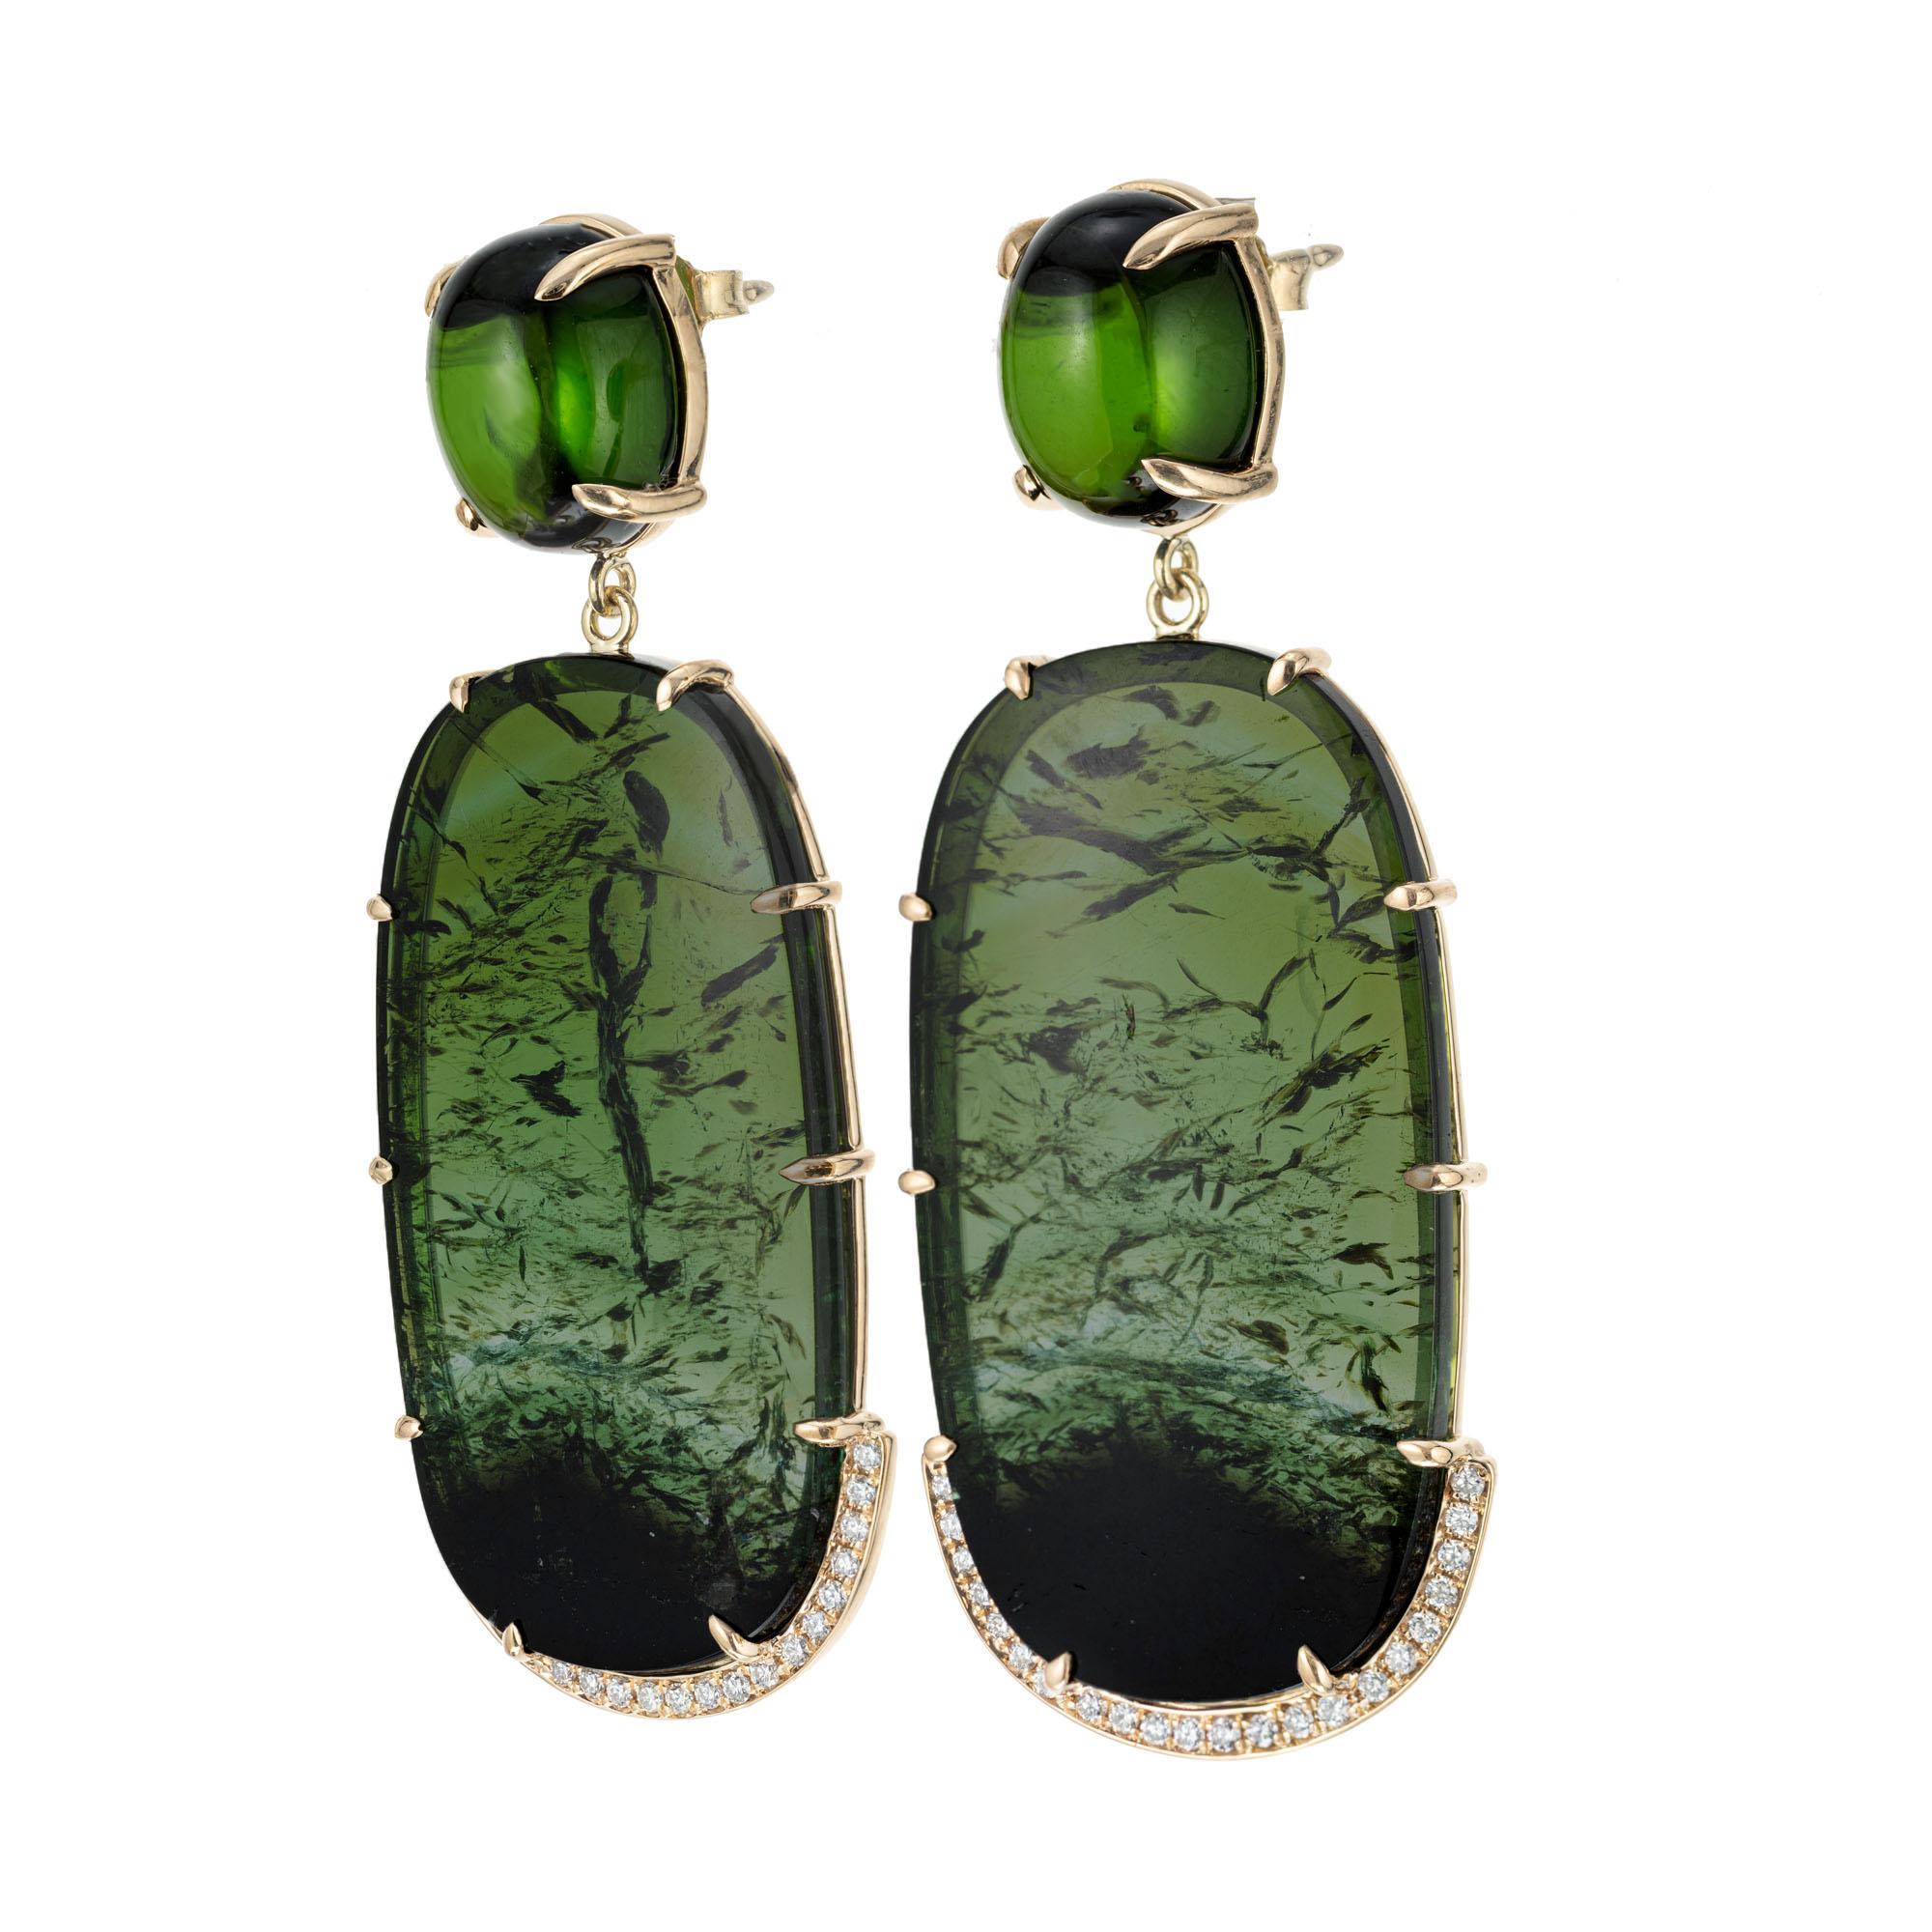 Natural tourmaline and diamond dangle earrings. Handmade in 18k yellow gold frames with oval tourmaline dangles accented with 44 round brilliant cut diamonds. Two oval cabochon tourmalines tops. Designed and crafted in the Peter Suchy workshop.

2